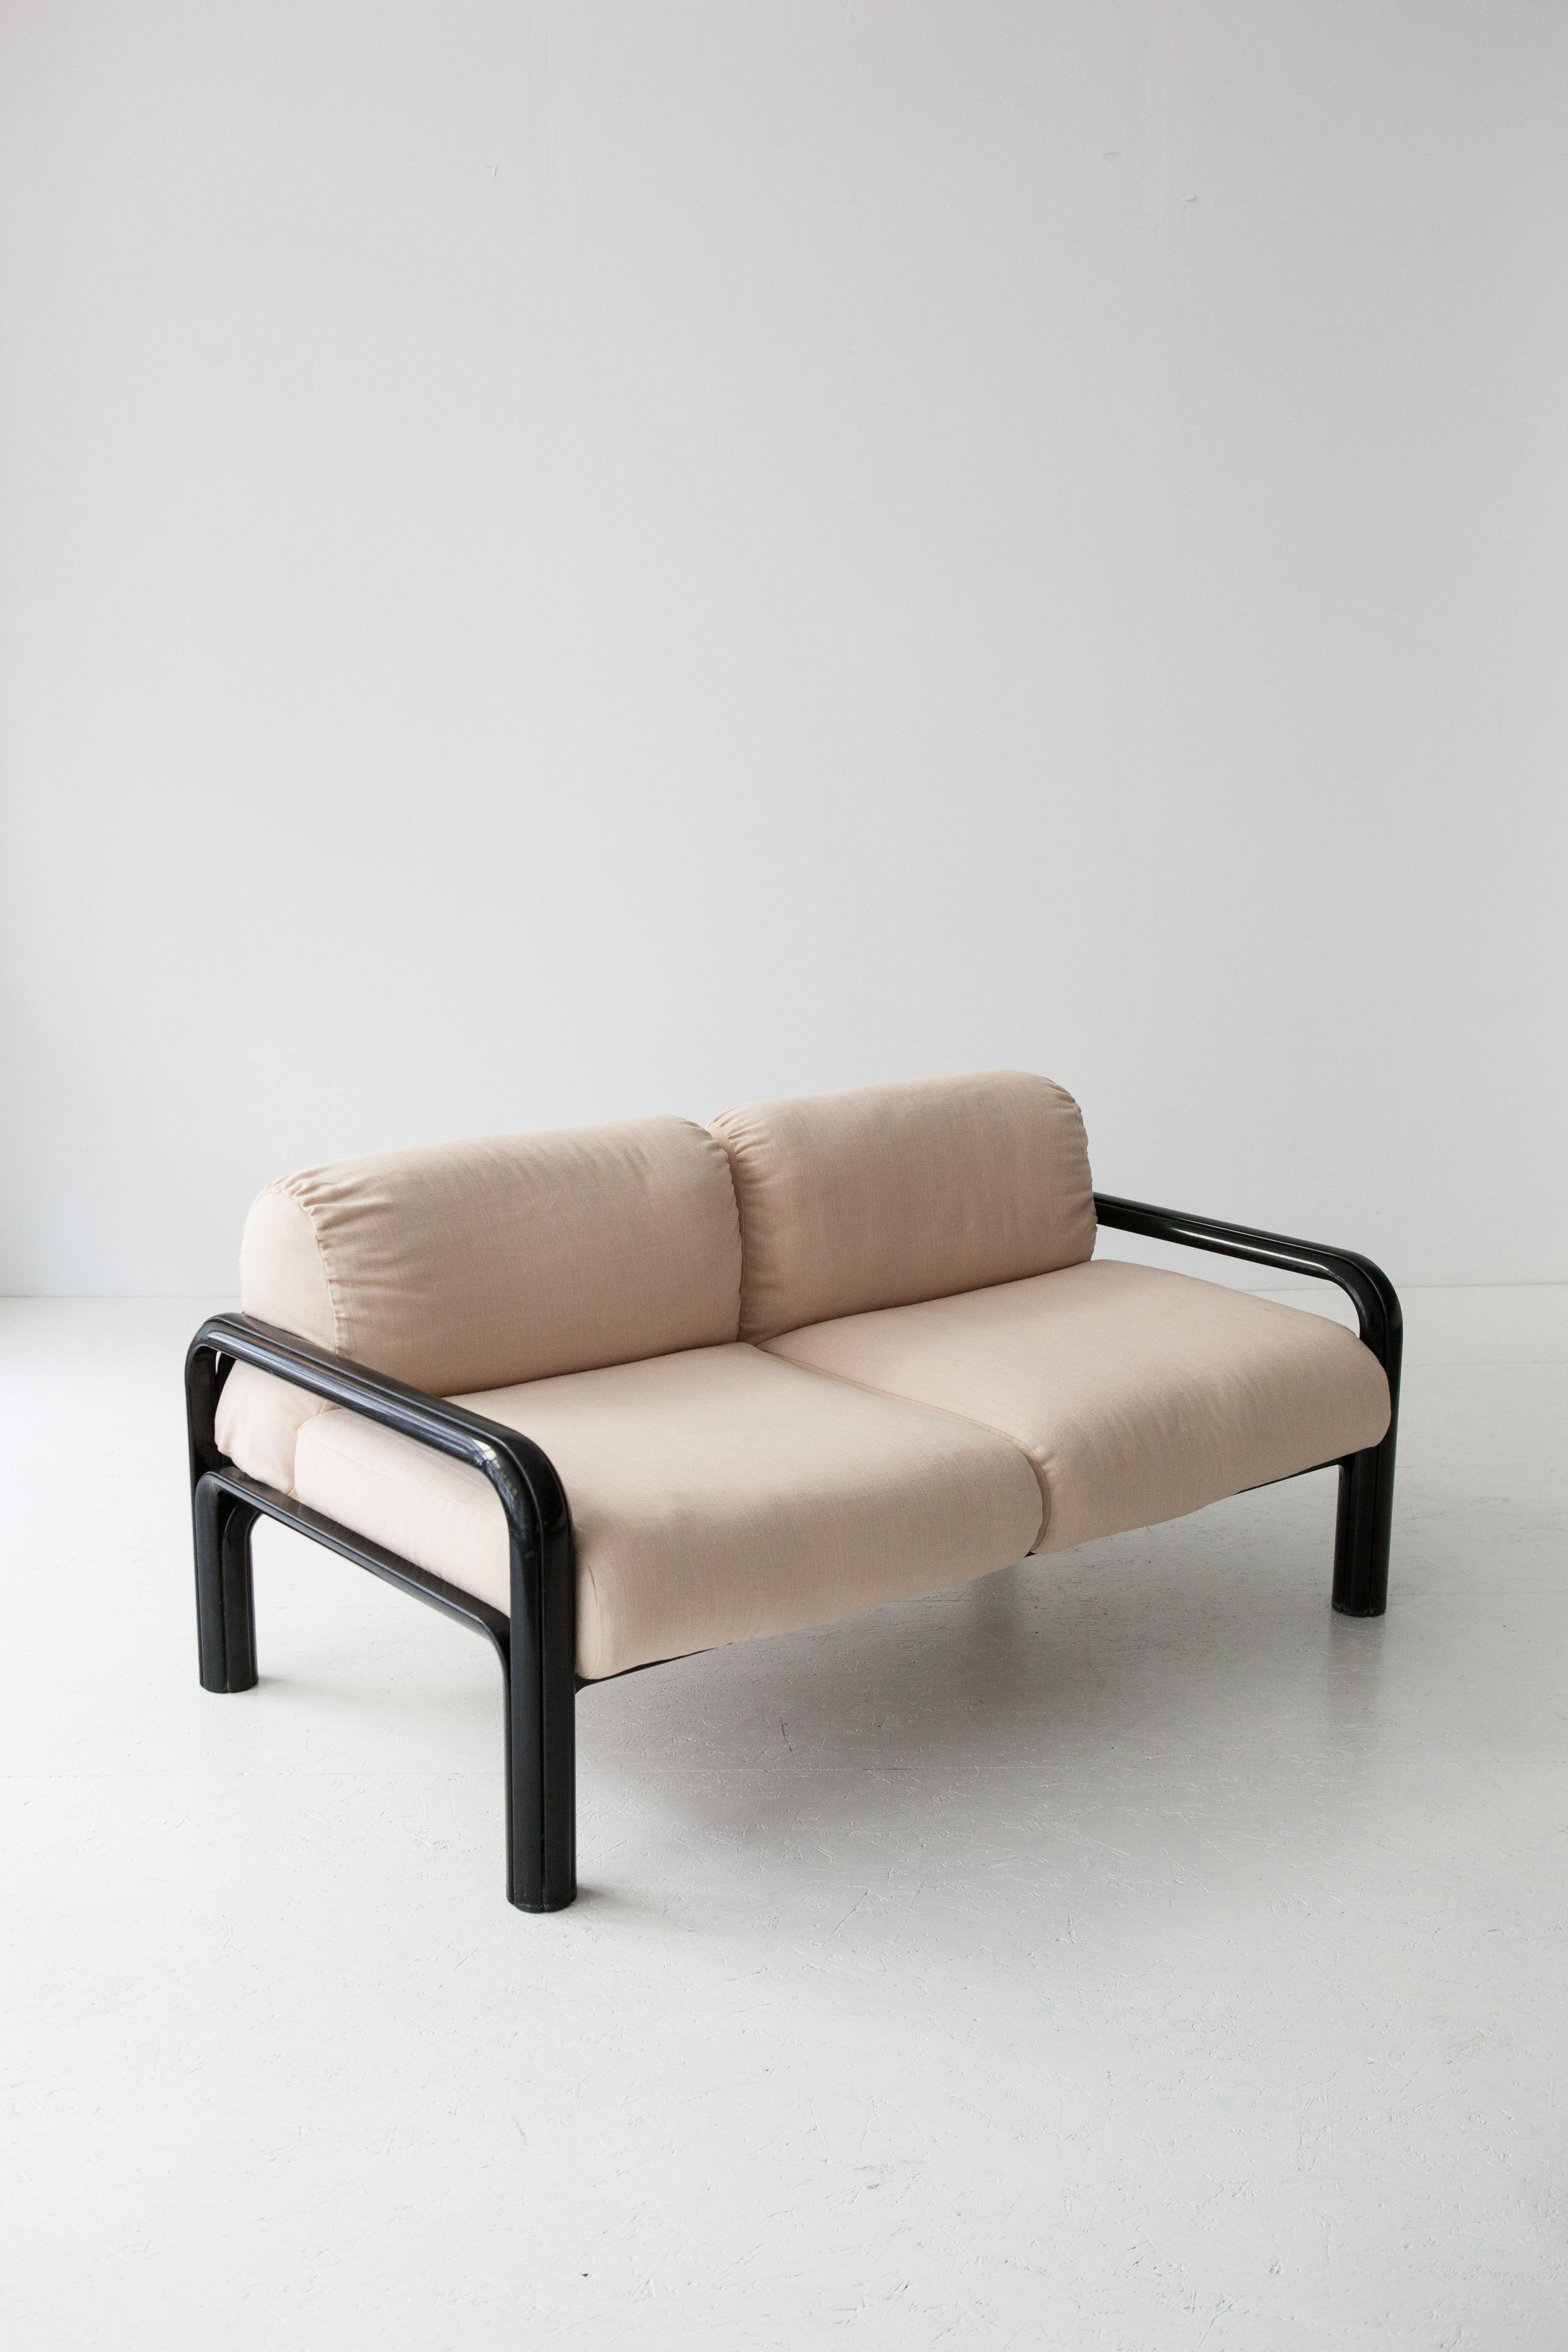 Loveseat sofa by Gae Aulenti for Knoll, 1970s For Sale 1